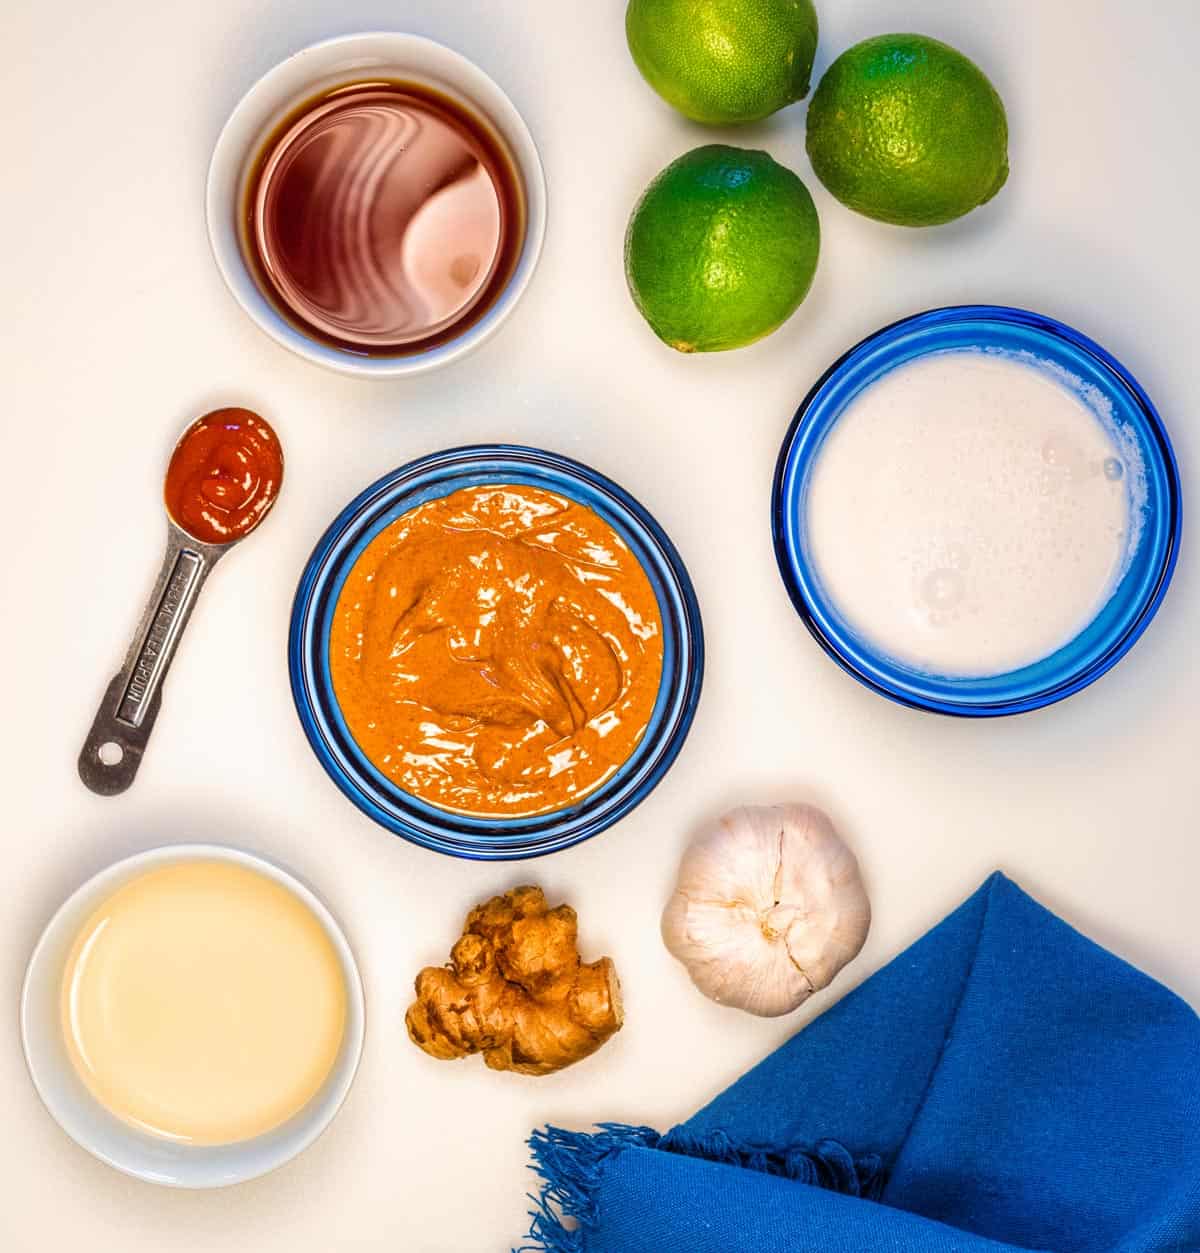 A dish of peanut butter, dish or coconut milk, piece of ginger, clove of garlic, three limes and teaspoon of hot sauce all ready to make peanut sauce.